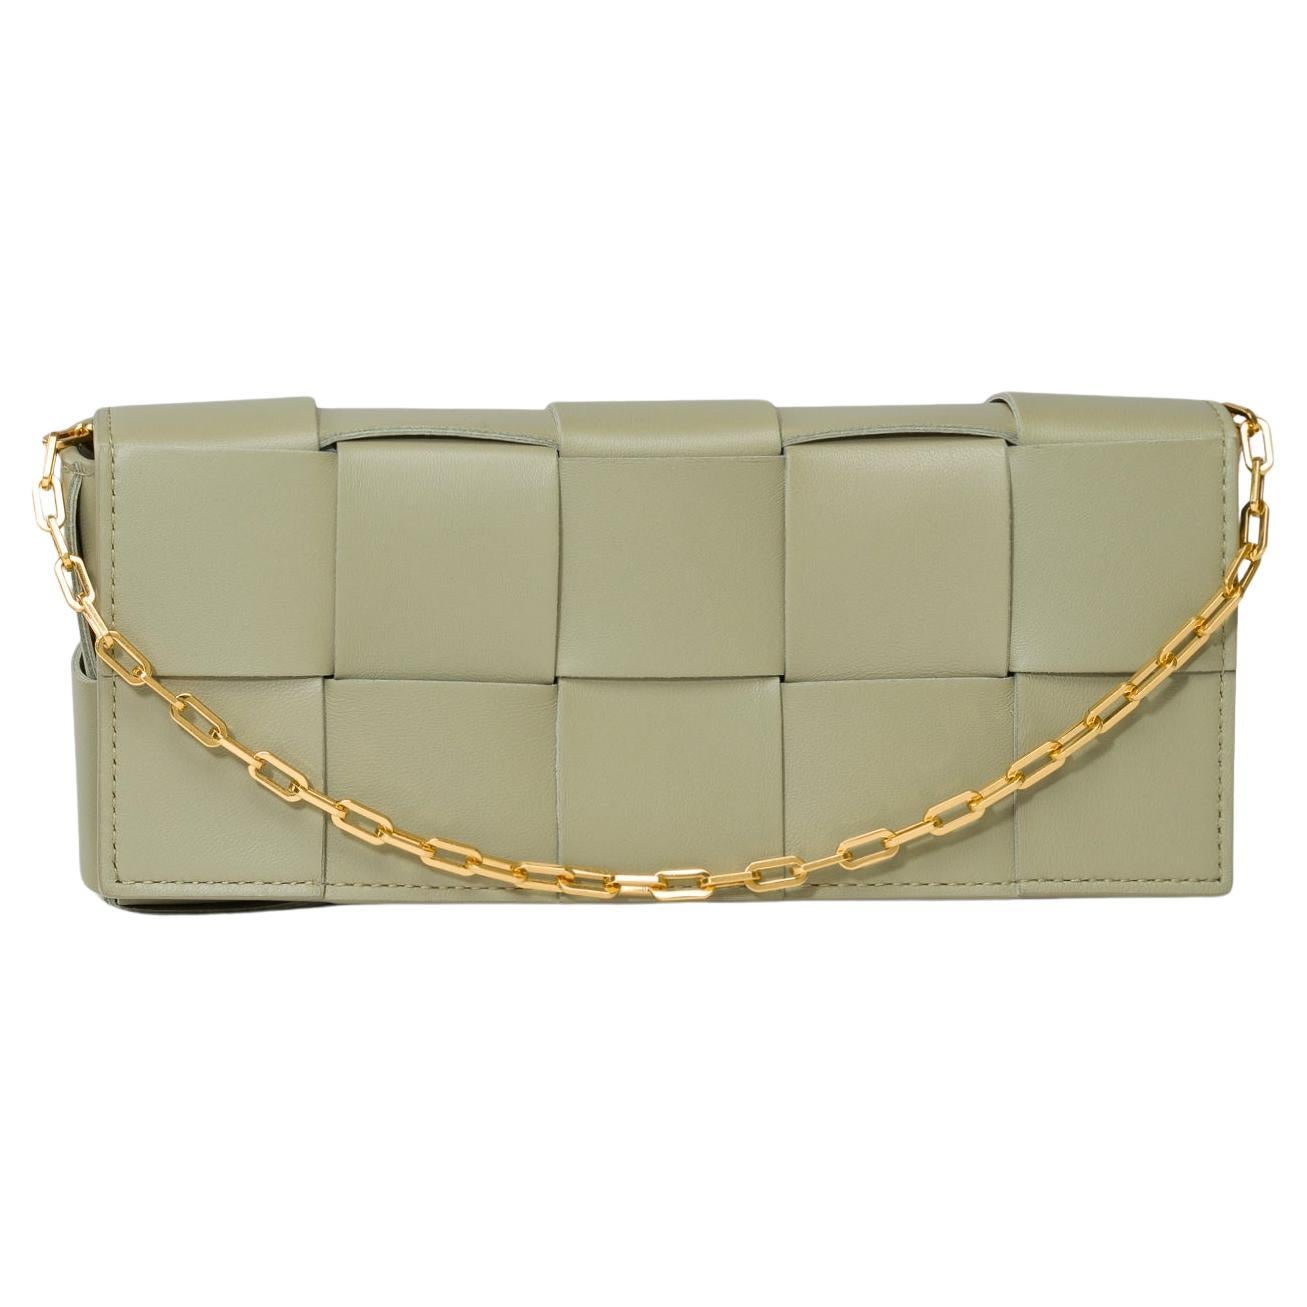 Gorgeous​ ​Bottega​ ​Veneta​ ​Phone​ ​Pouch​ ​Baguette​ ​bag​ ​in​ ​Tavertine​ ​green​ ​Intreccio​ ​smooth​ ​lambskin​ ​leather​ ​,​ ​signature​ ​orthogonal​ ​braiding​ ​with​ ​detachable​ ​chain,​ ​golden​ ​metal​ ​trim,​ ​signature​ ​chain​ ​with​